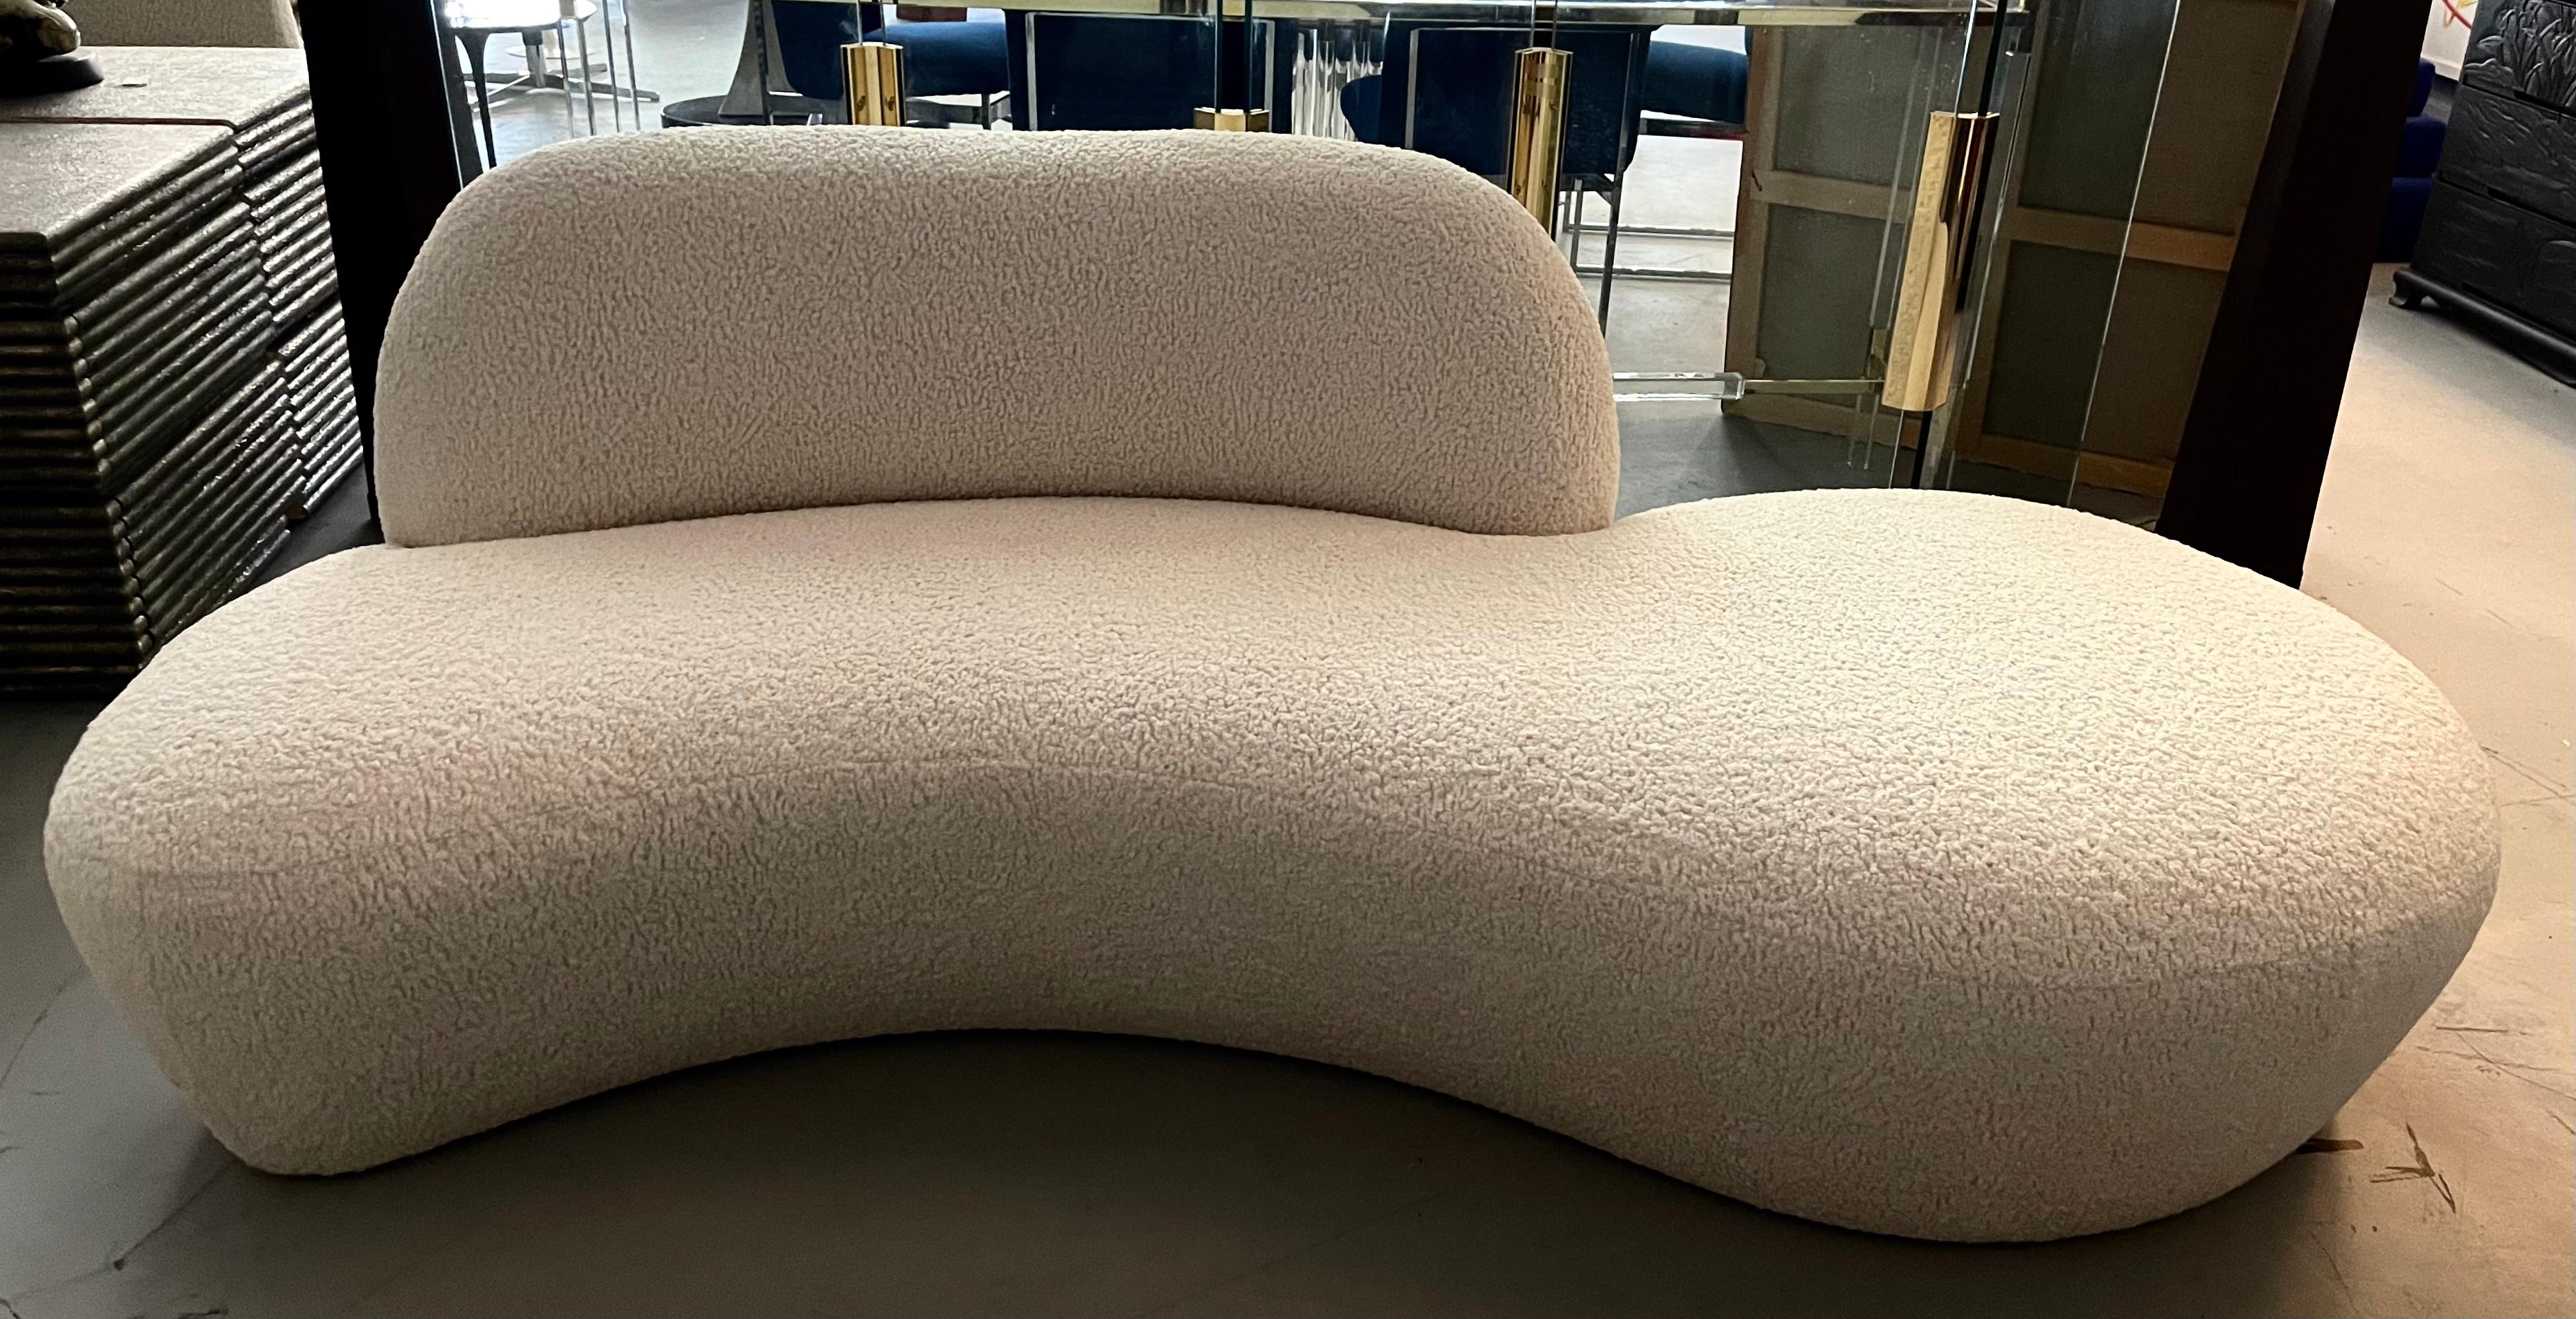 A lovely cloud Zoe cloud sofa designed by Vladimir Kagan for American Leather. Just reupholstered in an Italian faux sheepskin boucle. Measures próx 88 x 41 inches and the seat height is 17 inches.